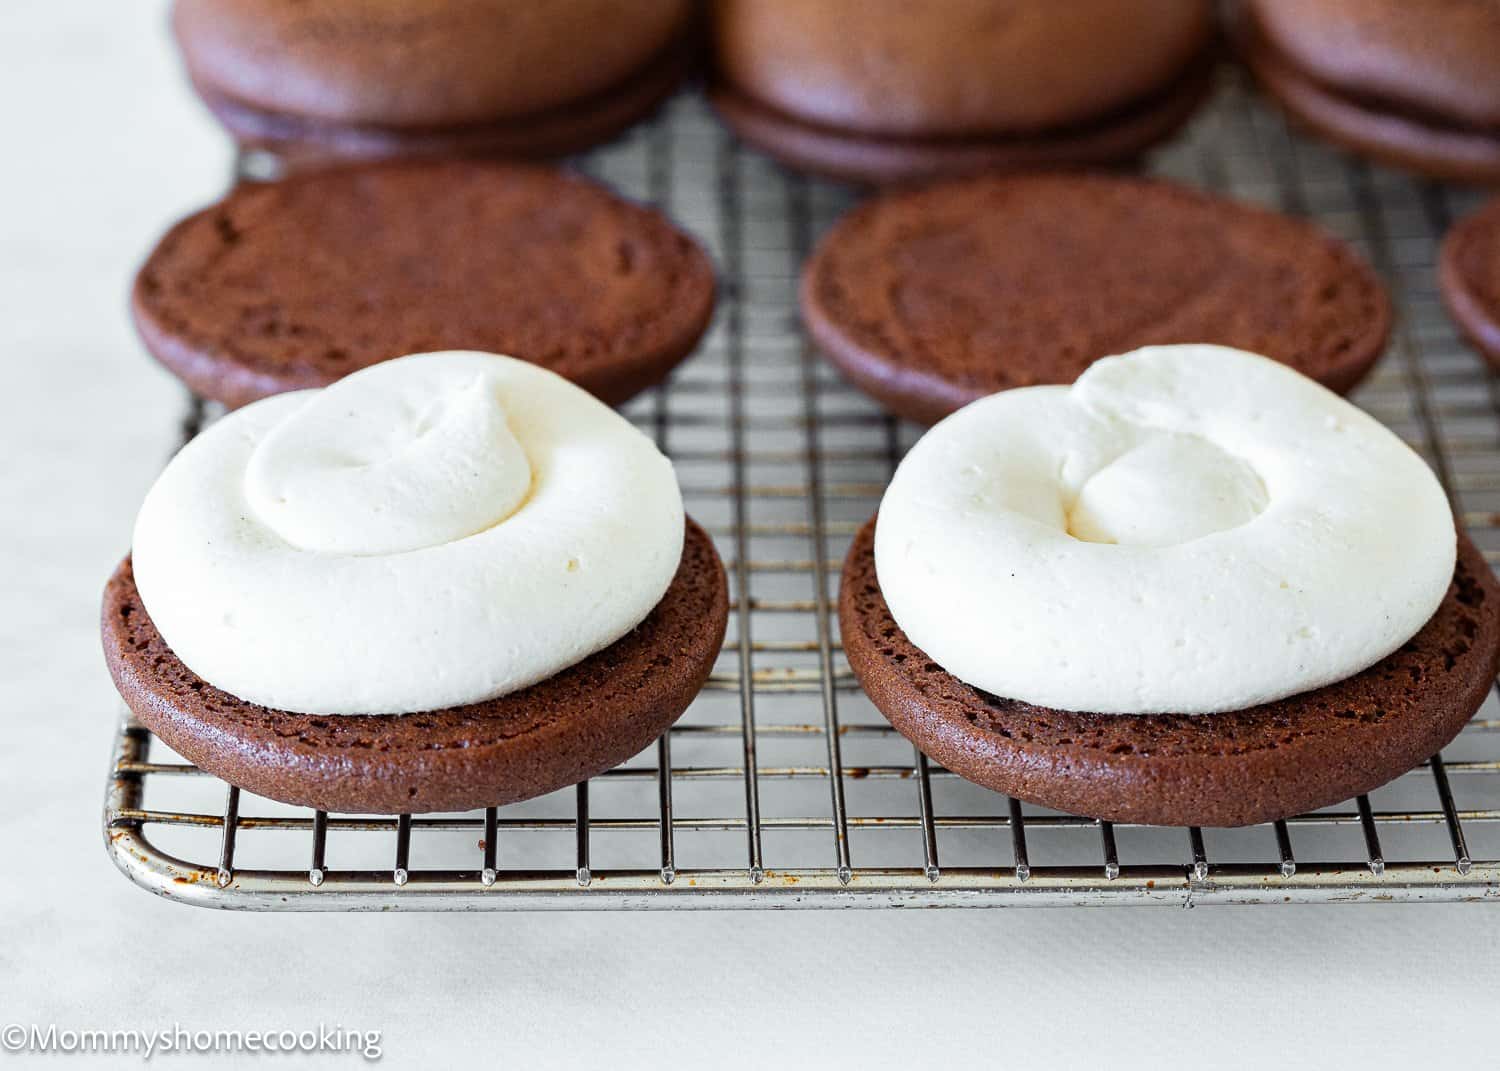 Egg-Free Chocolate Whoopie Pies with frosting on a cooling rack.